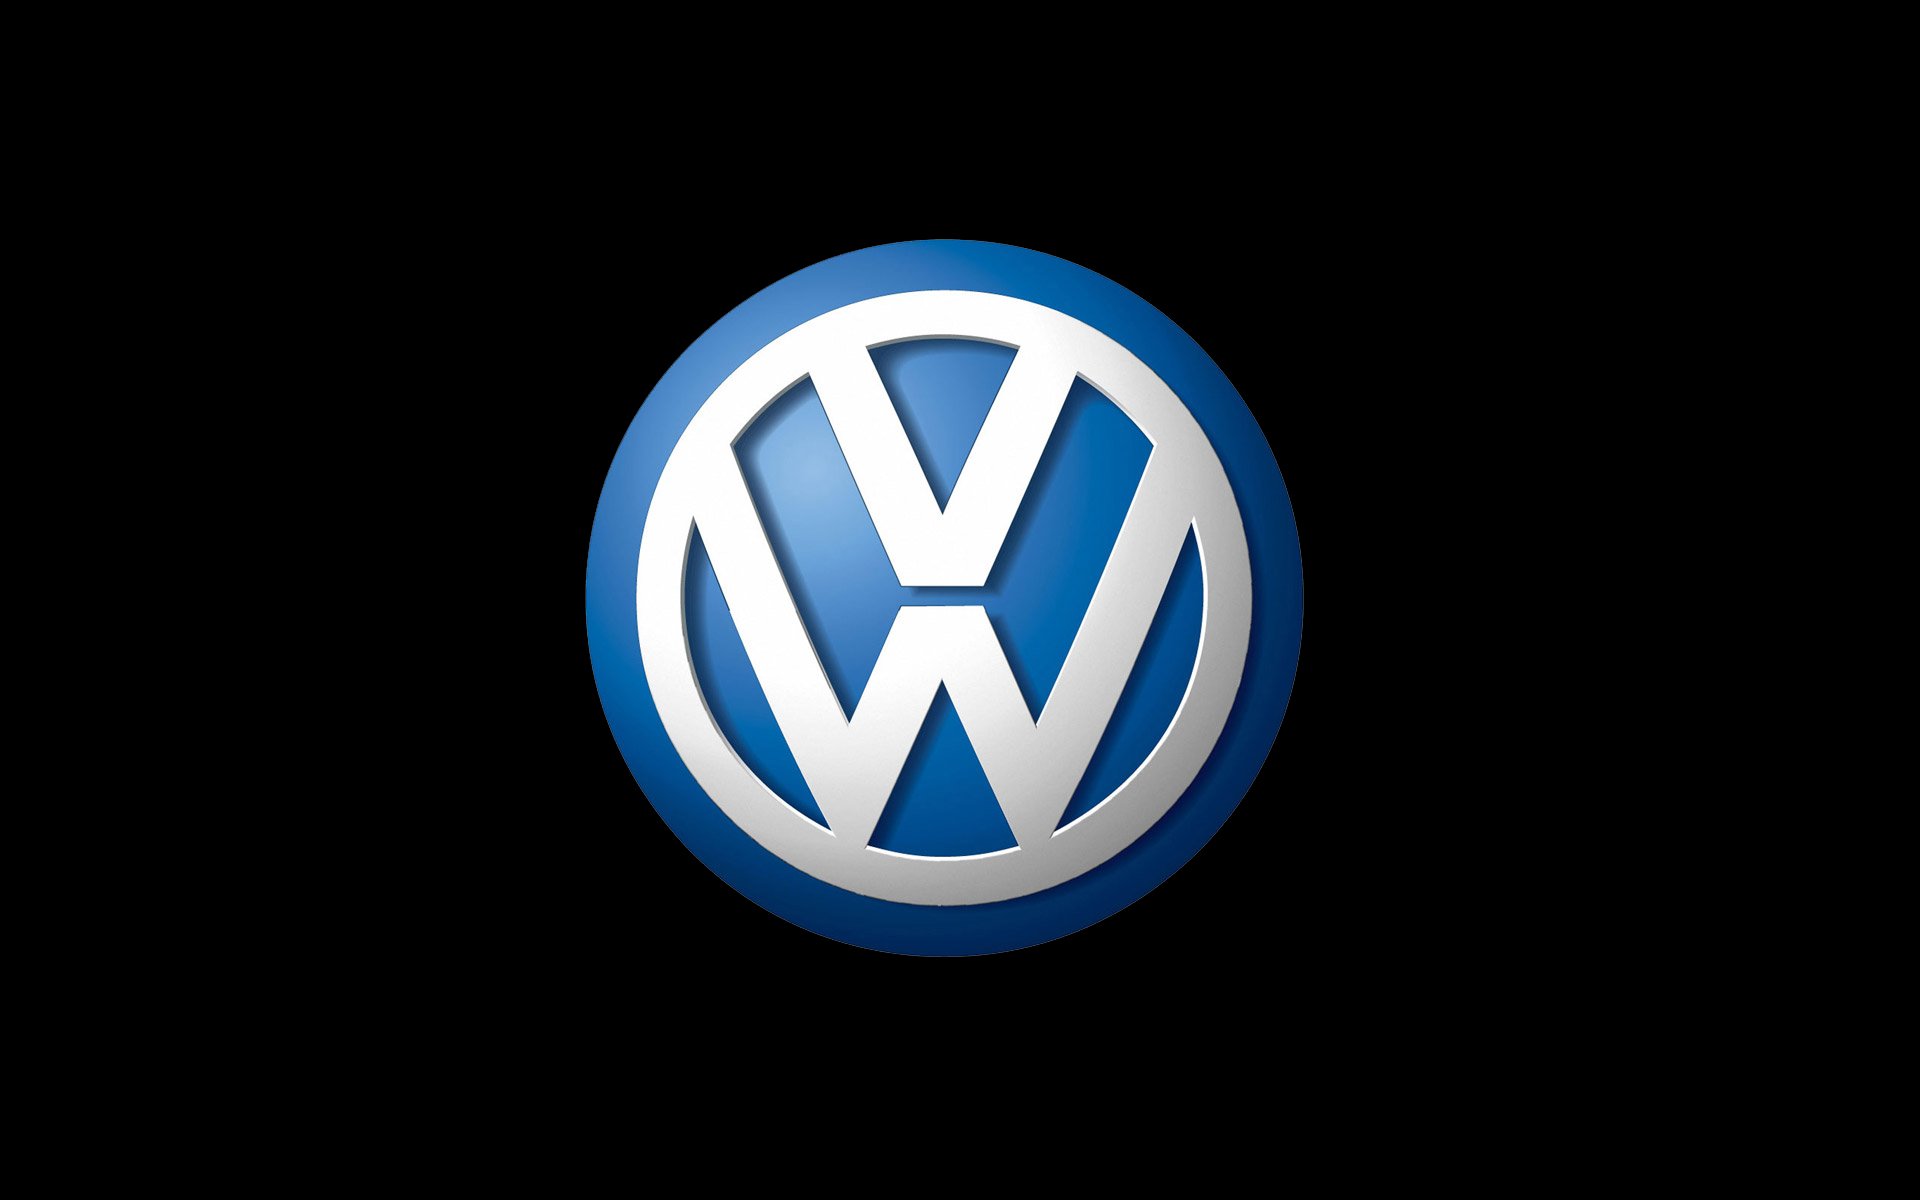 File Name 914054 Gallery For Volkswagen Logo HD Wallpapers 1920x1200